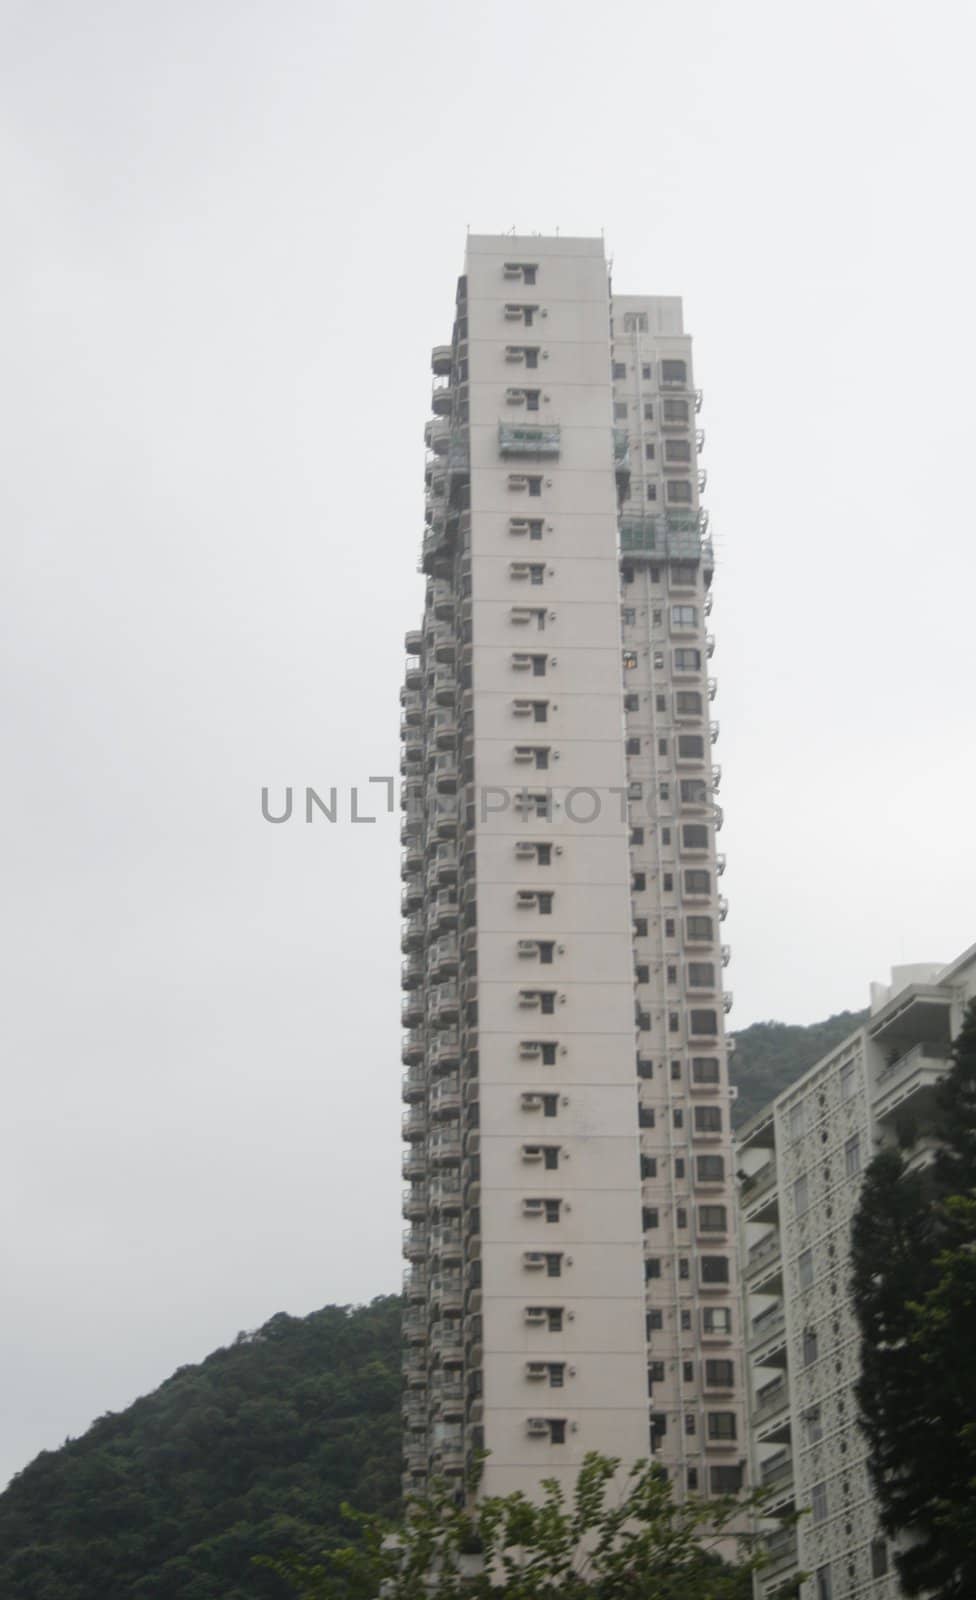 High-rise on the way to the Peak, Hong Kong, China by koep